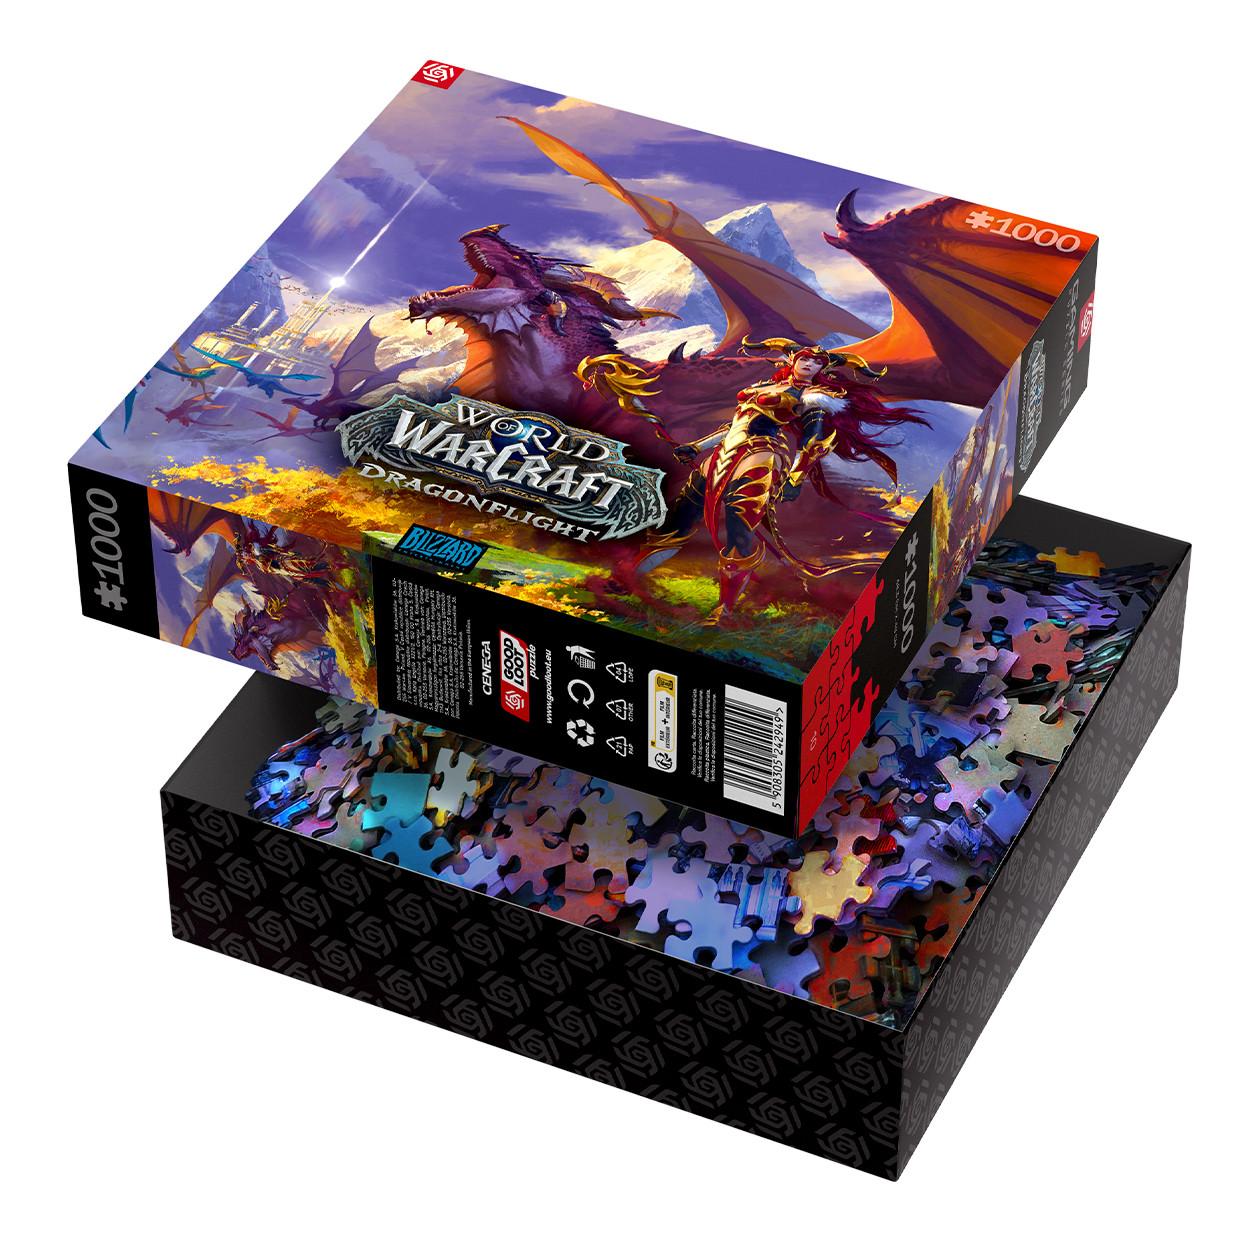 Good Loot  World of Warcraft: Dragonflight - Puzzle 